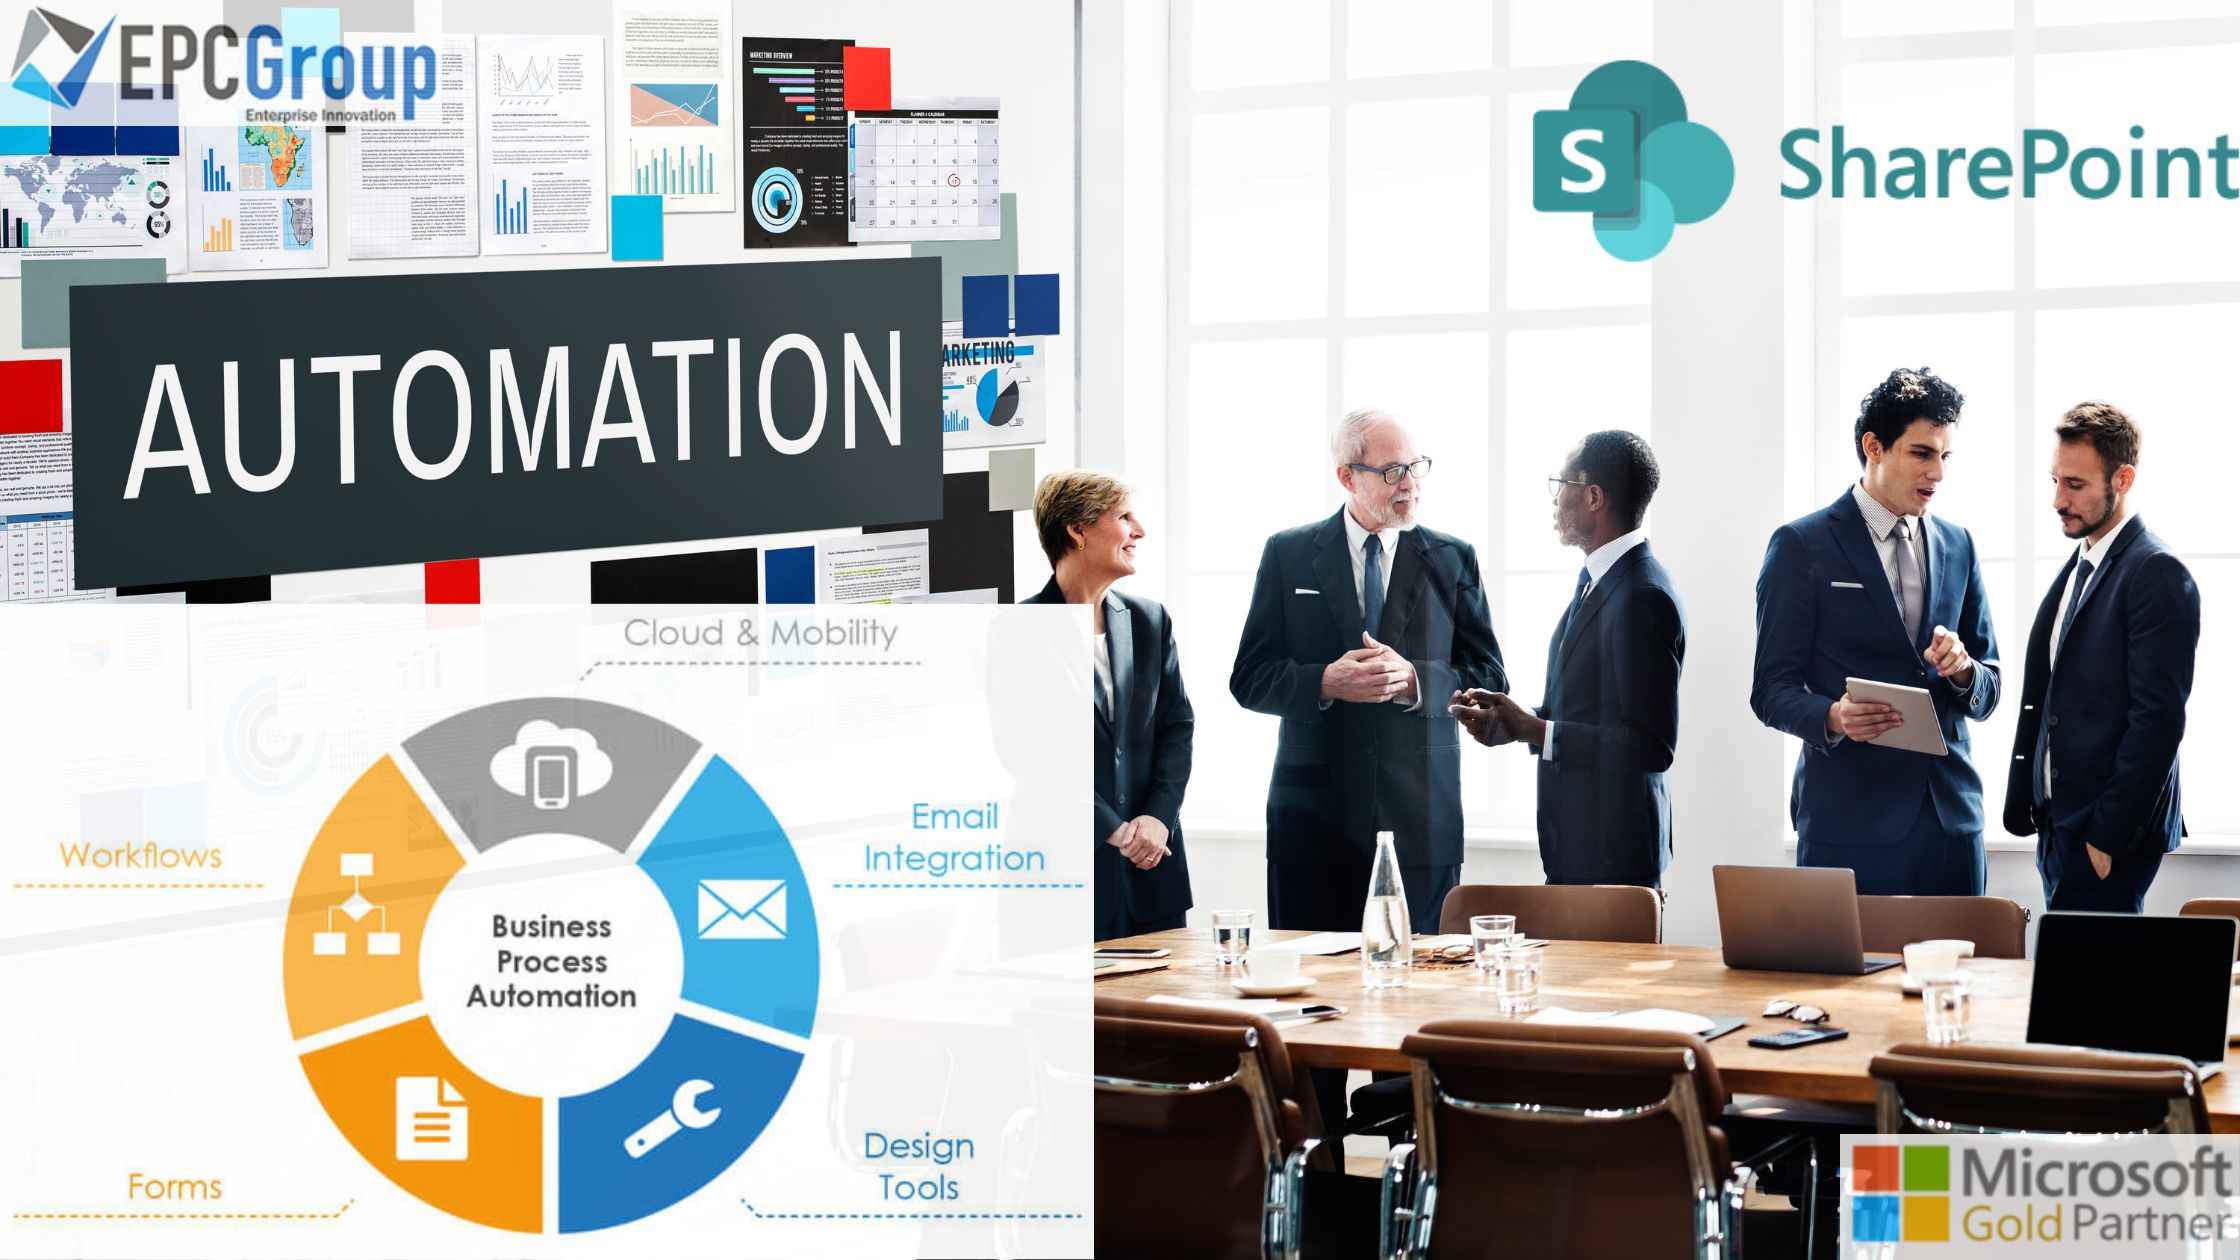 6 Benefits of SharePoint Business Process Automation - thumb image